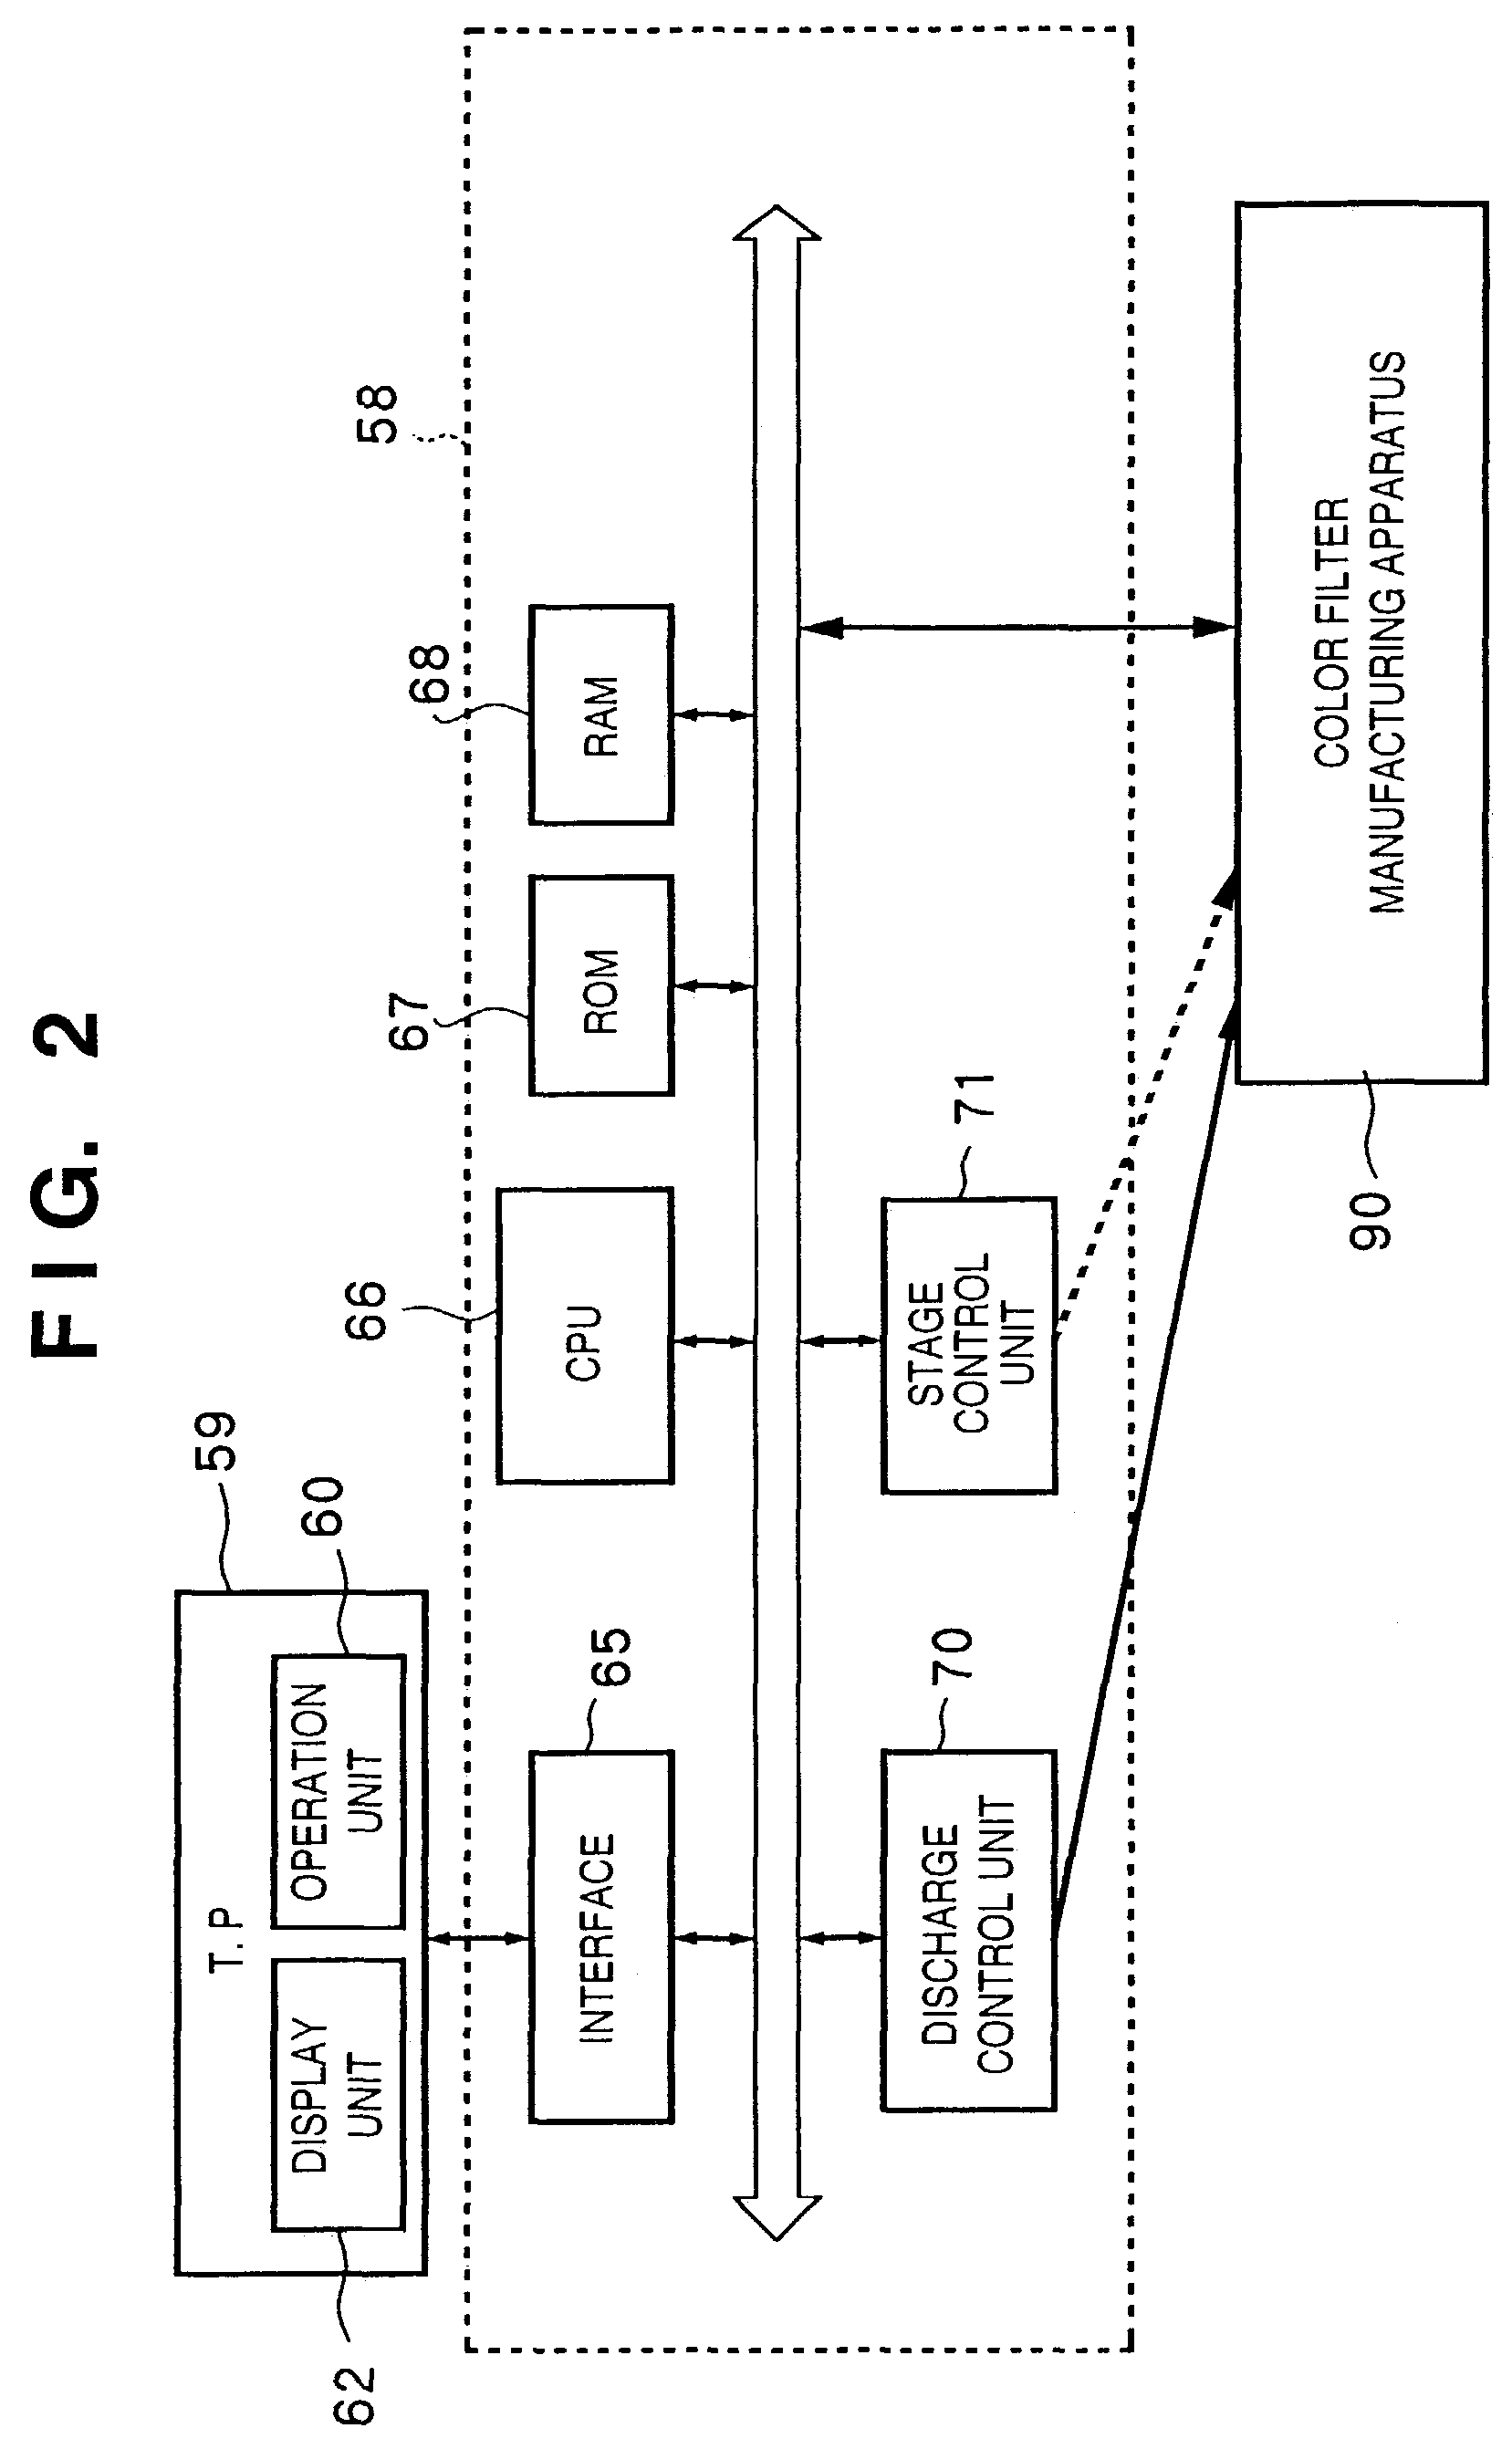 Liquid discharge method and apparatus using individually controllable nozzles